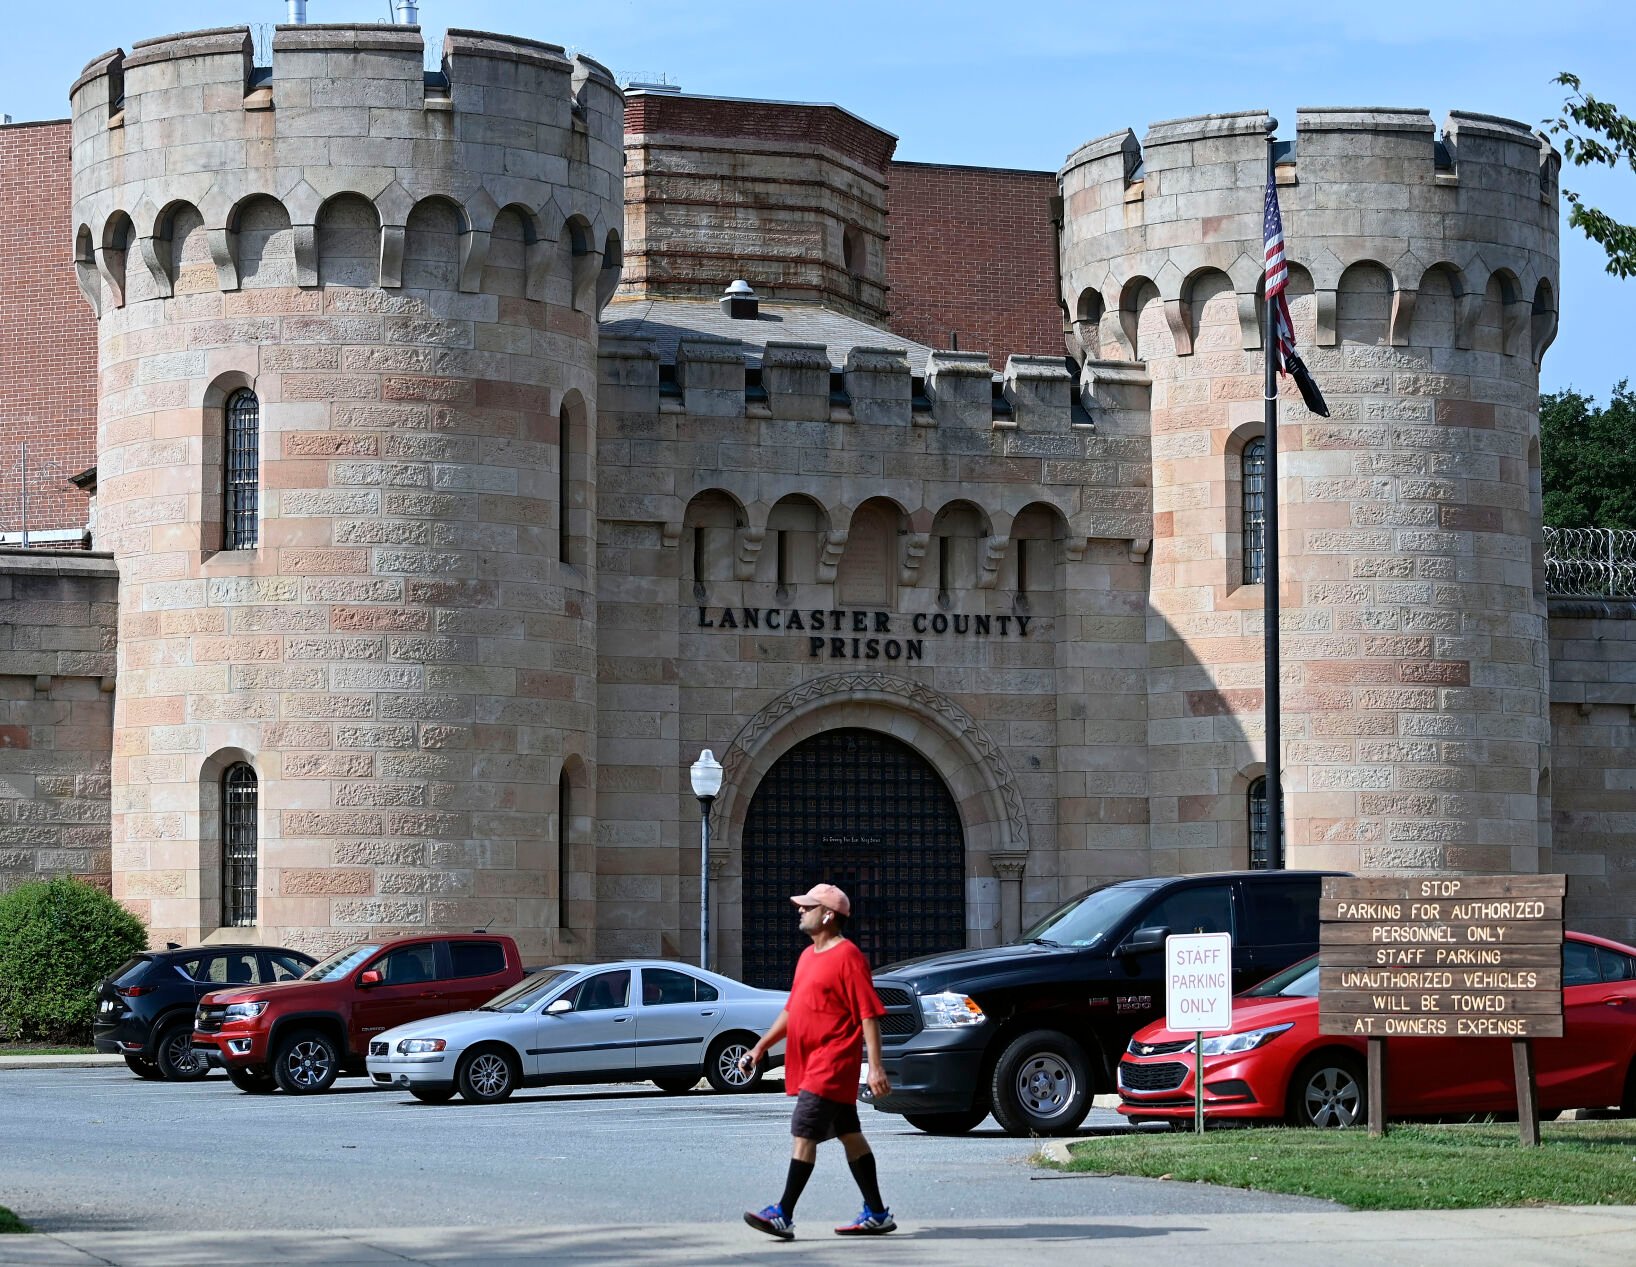 Fewer beds needed at Lancaster County Prison as county 